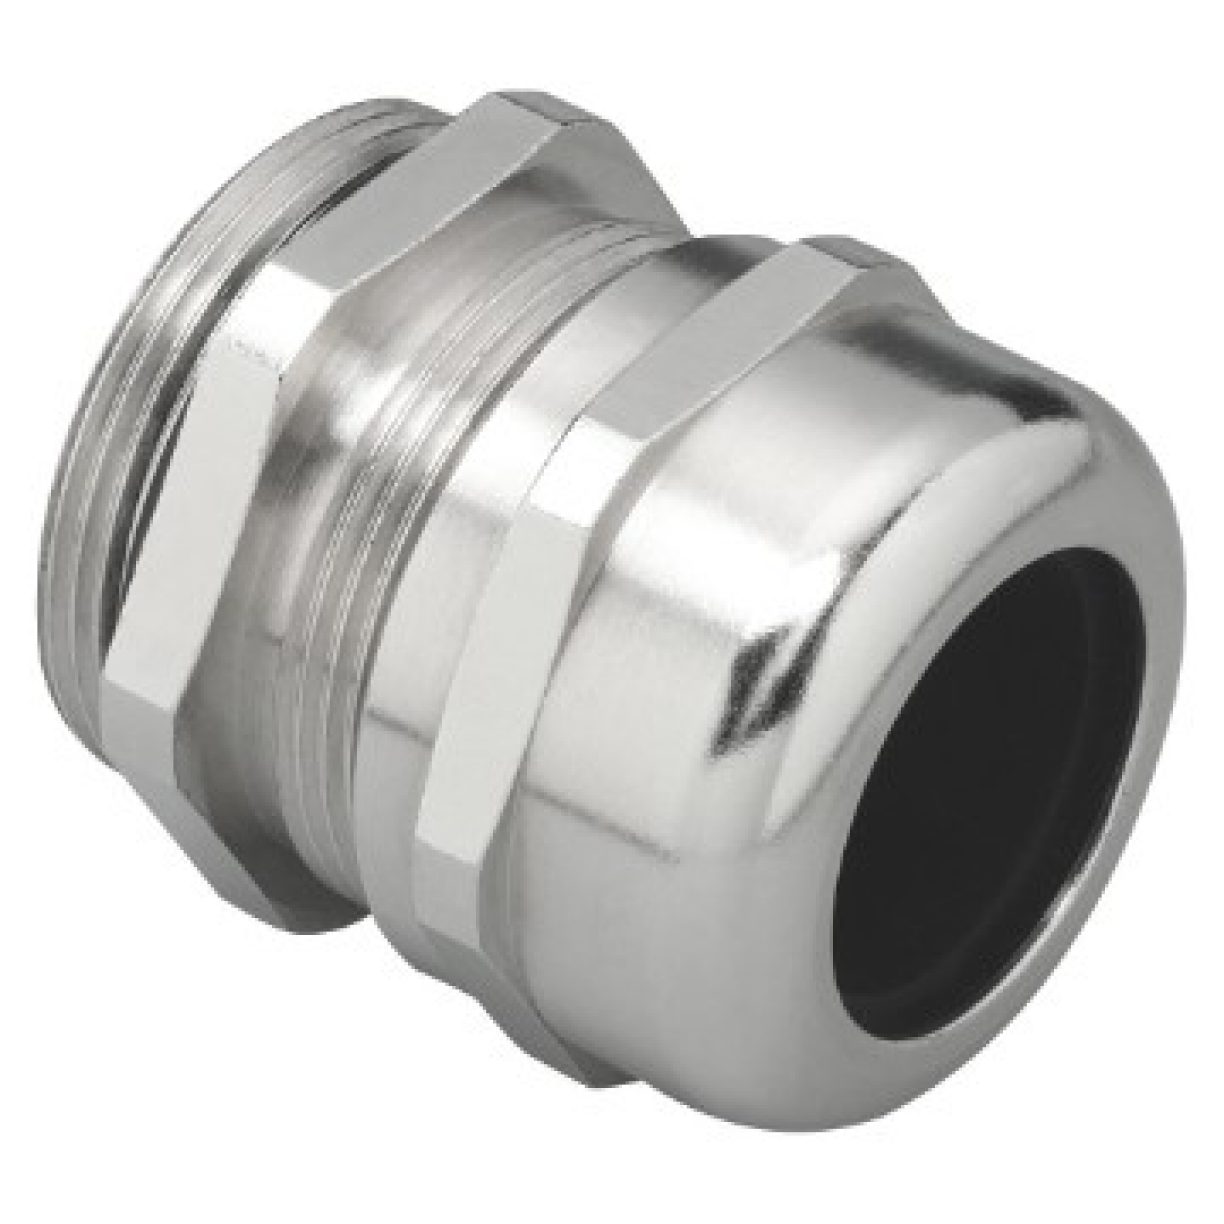 Nickel-plated brass cable gland - 1160.20 - AGRO - IP68 / IP69 / insulated